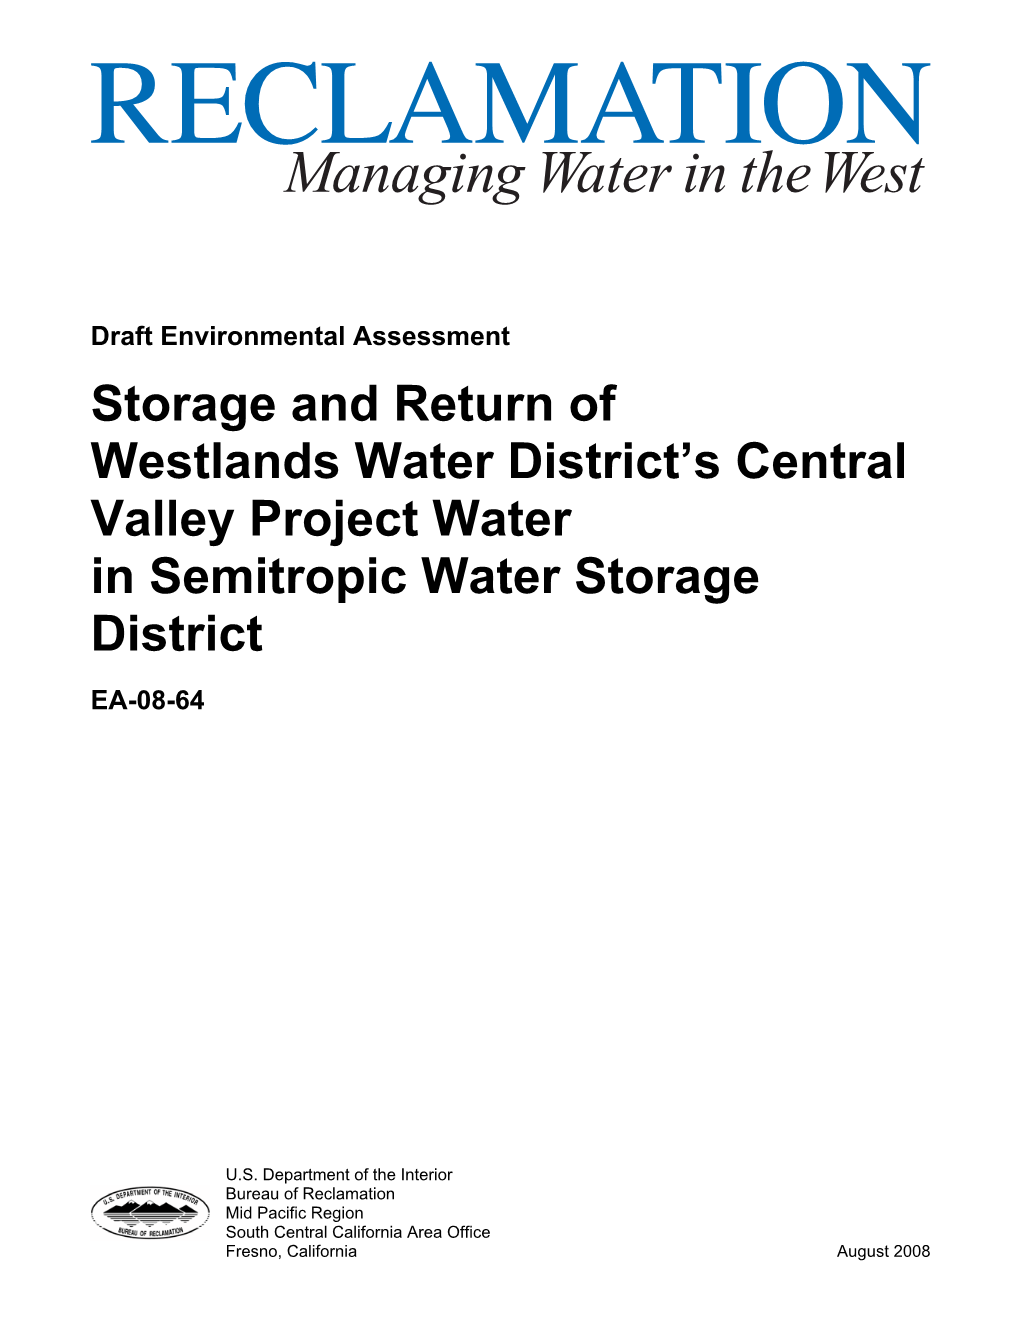 Storage and Return of Westlands Water District's Central Valley